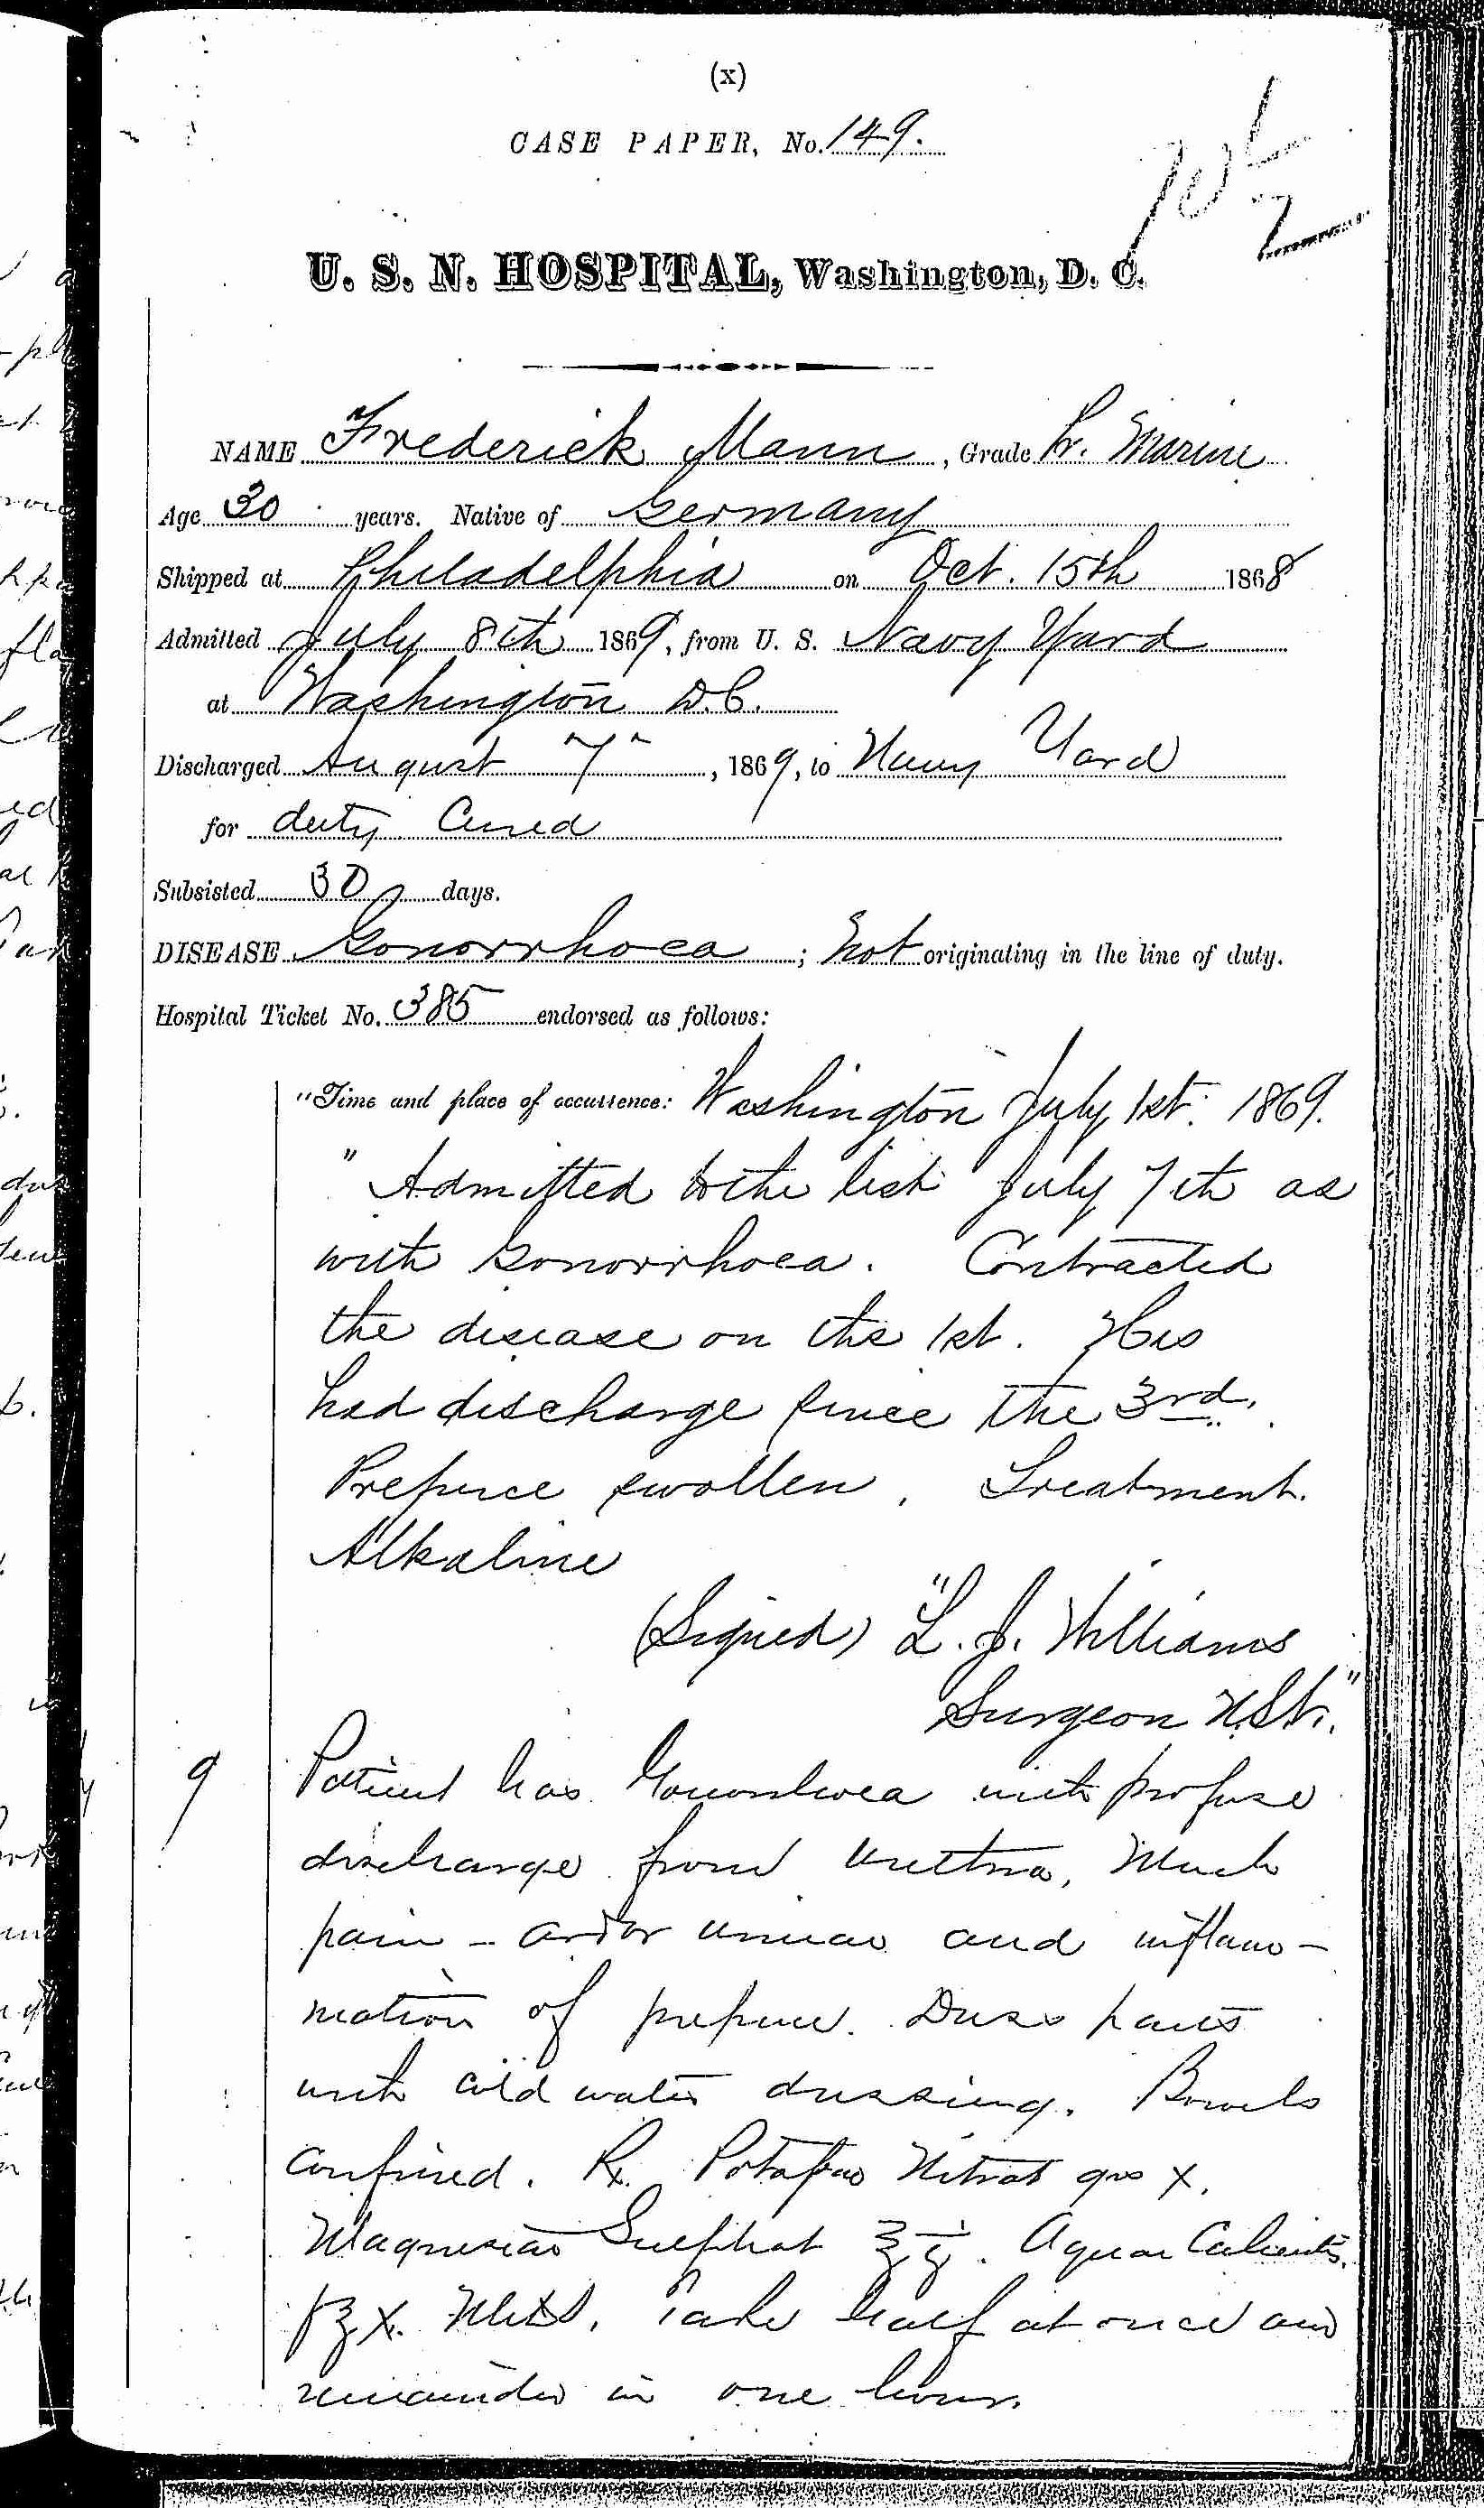 Entry for Frederick Mann (second admission page 1 of 3) in the log Hospital Tickets and Case Papers - Naval Hospital - Washington, D.C. - 1868-69